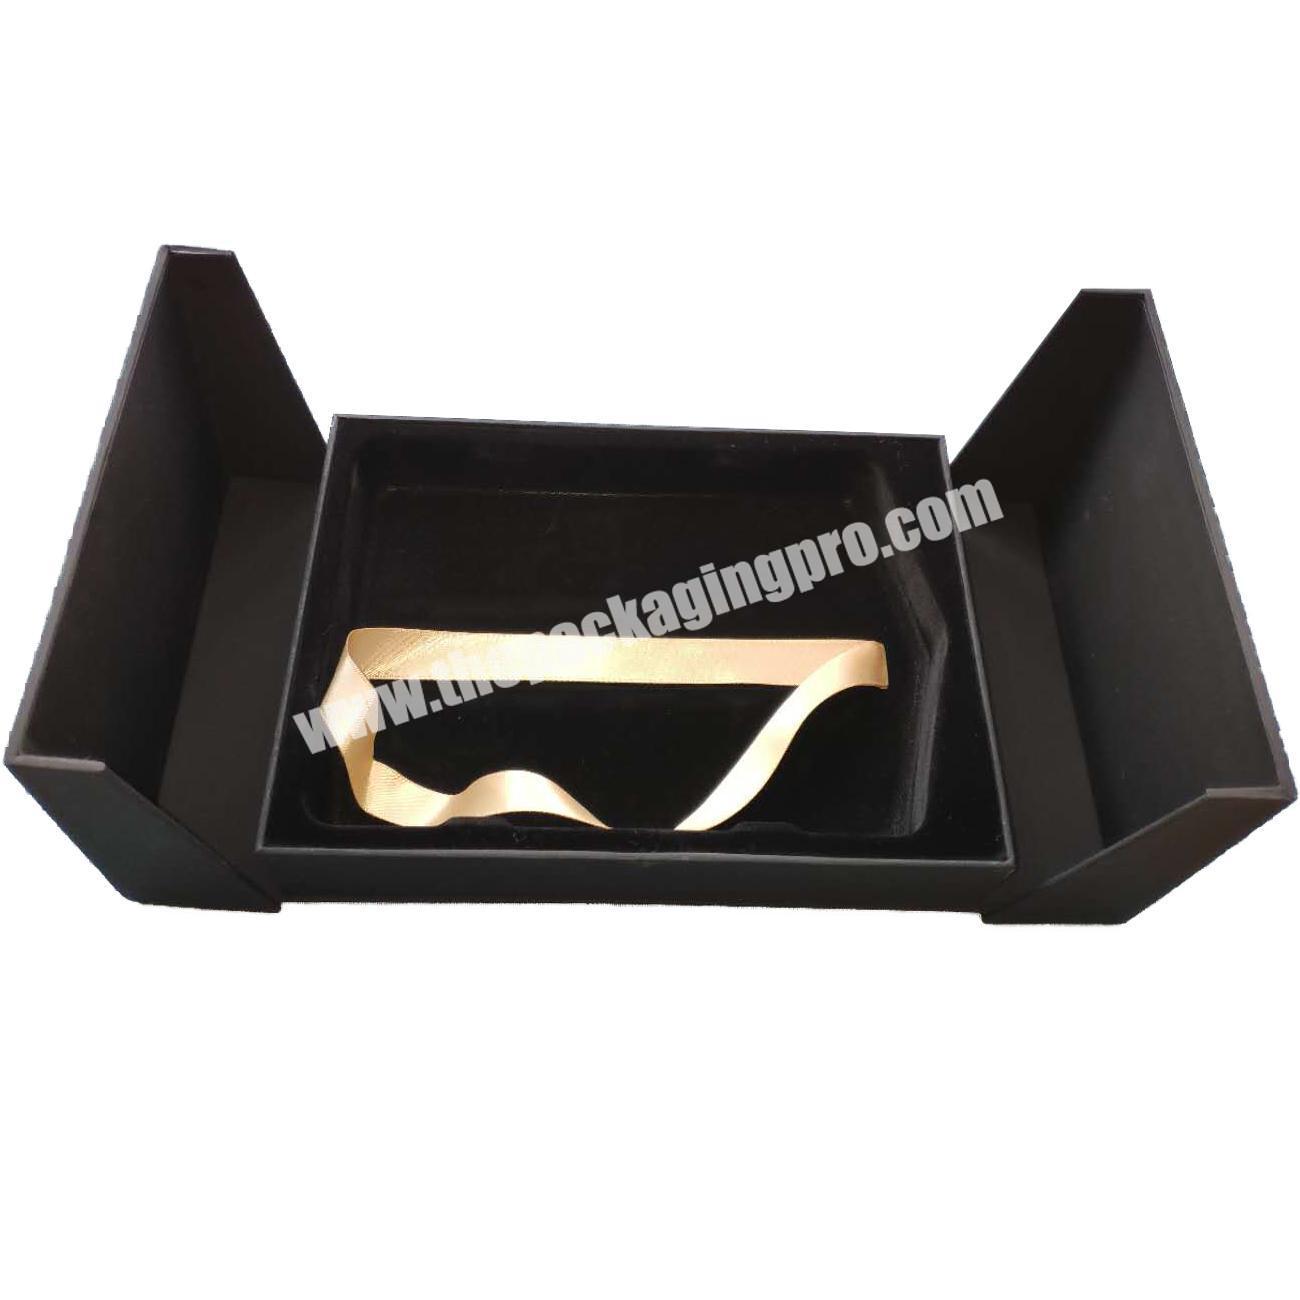 Hot Sale High Grade Magnetic Boxes For Gift Pack LuxuryJewelryCosmetic Boxes